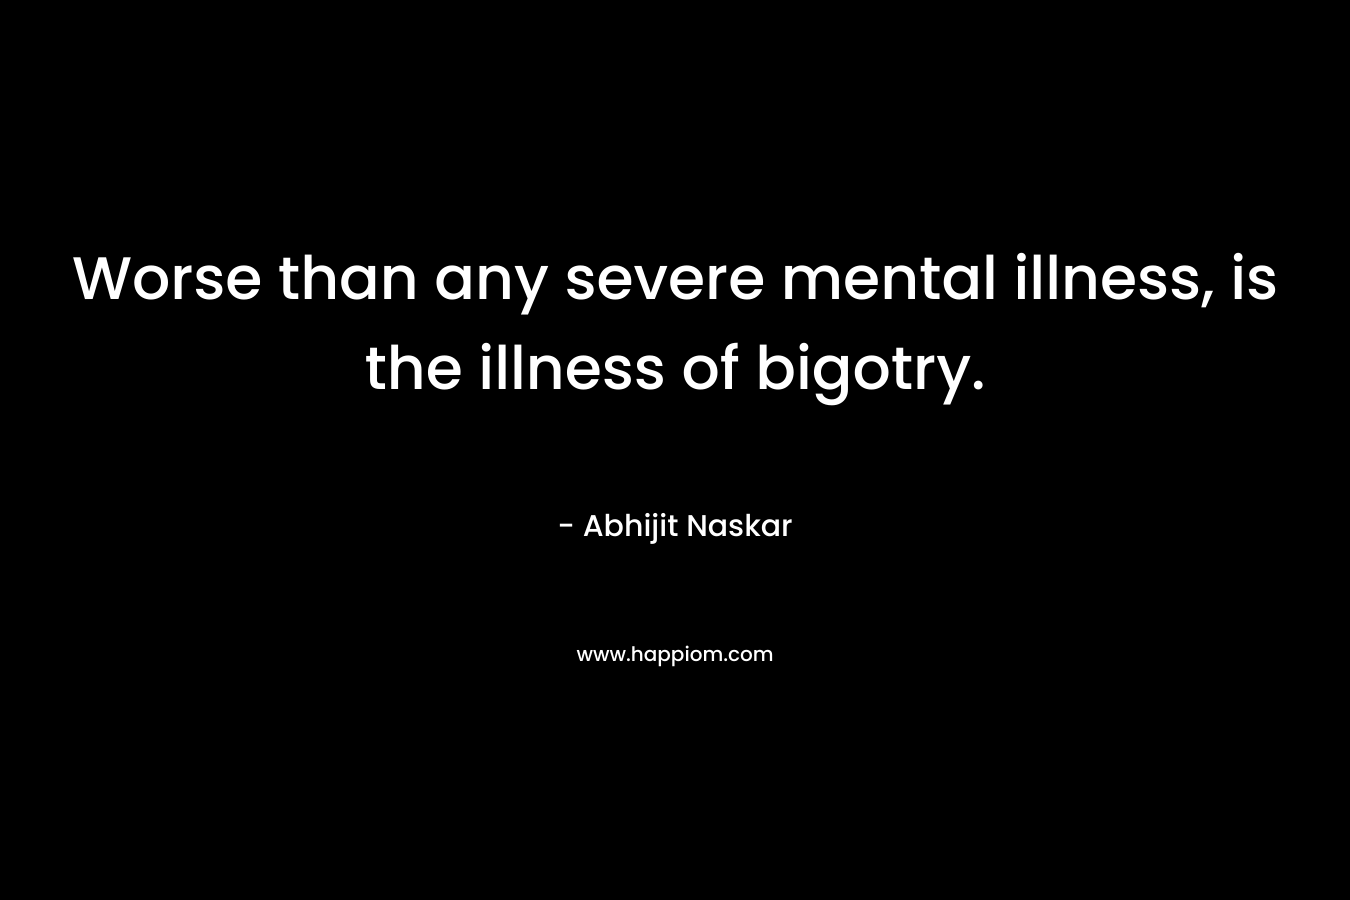 Worse than any severe mental illness, is the illness of bigotry.